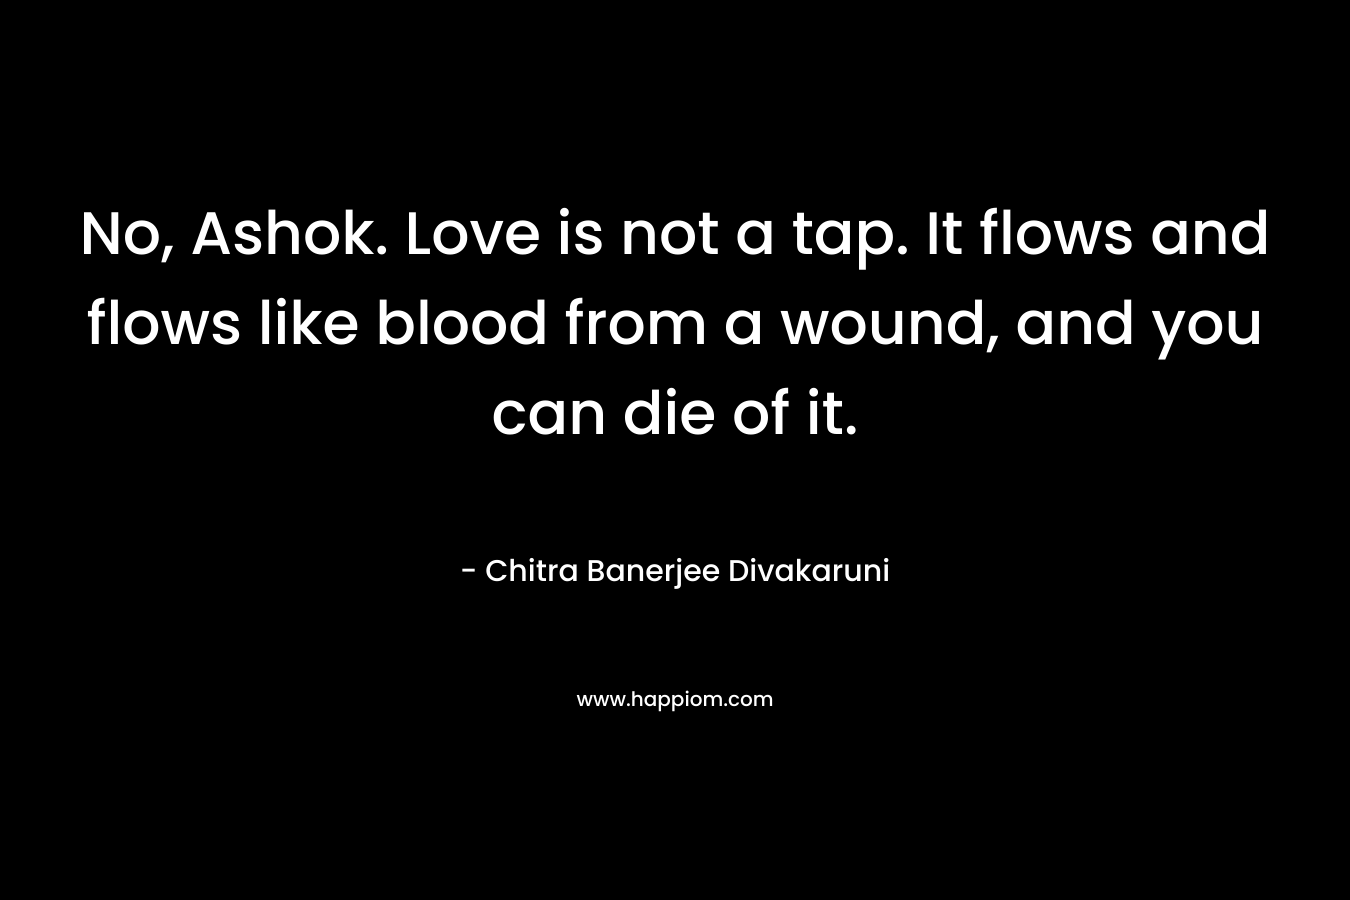 No, Ashok. Love is not a tap. It flows and flows like blood from a wound, and you can die of it. – Chitra Banerjee Divakaruni